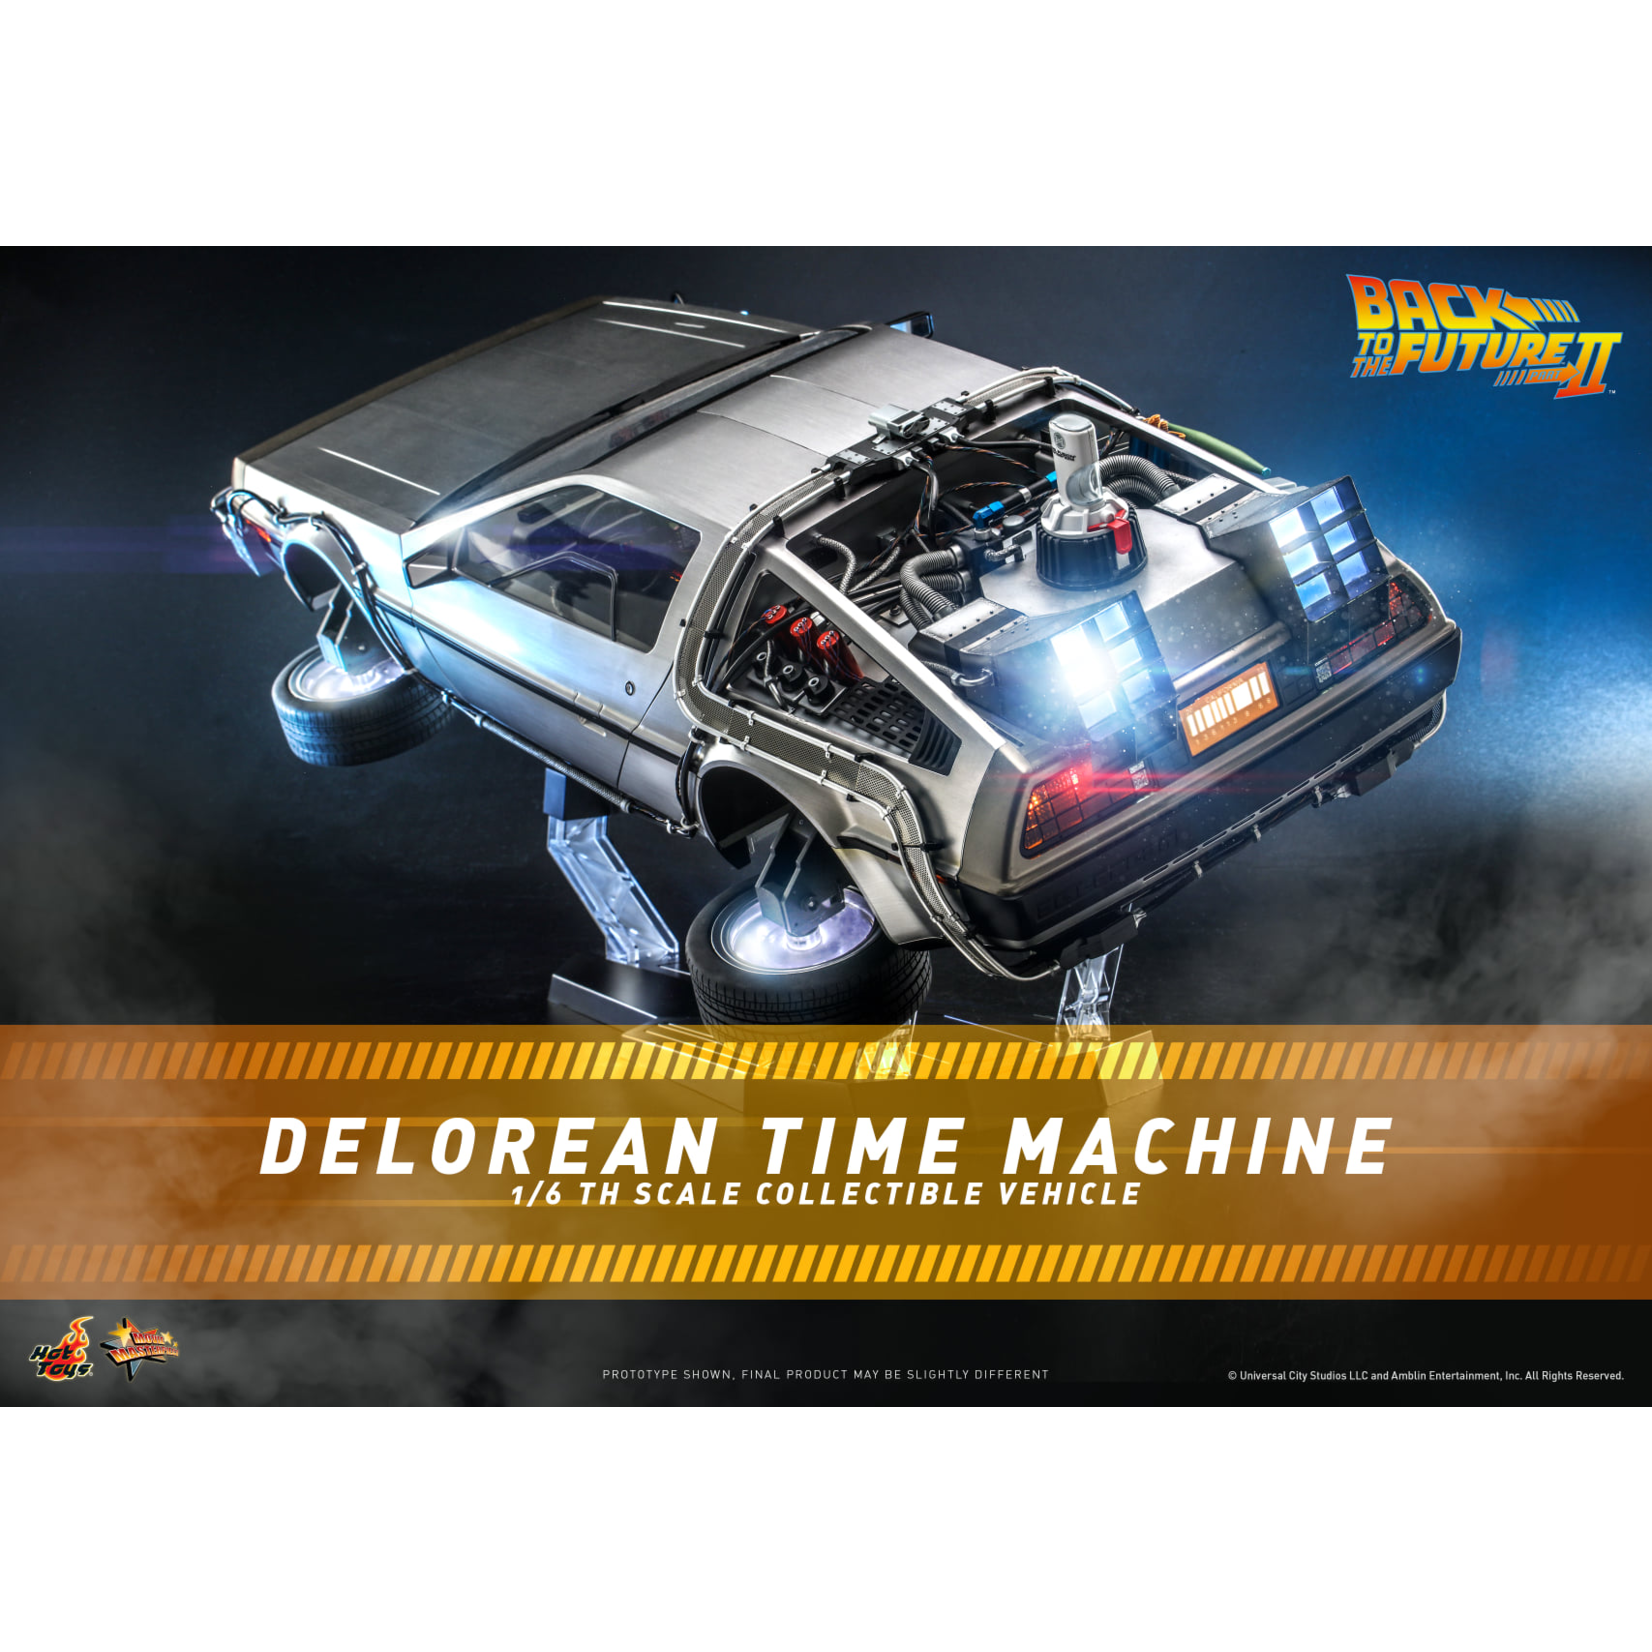 Hot Toys [Preorder] Hot Toys Back To The Future 2 -  Delorean Time Machine 1/6th Scale MMS636